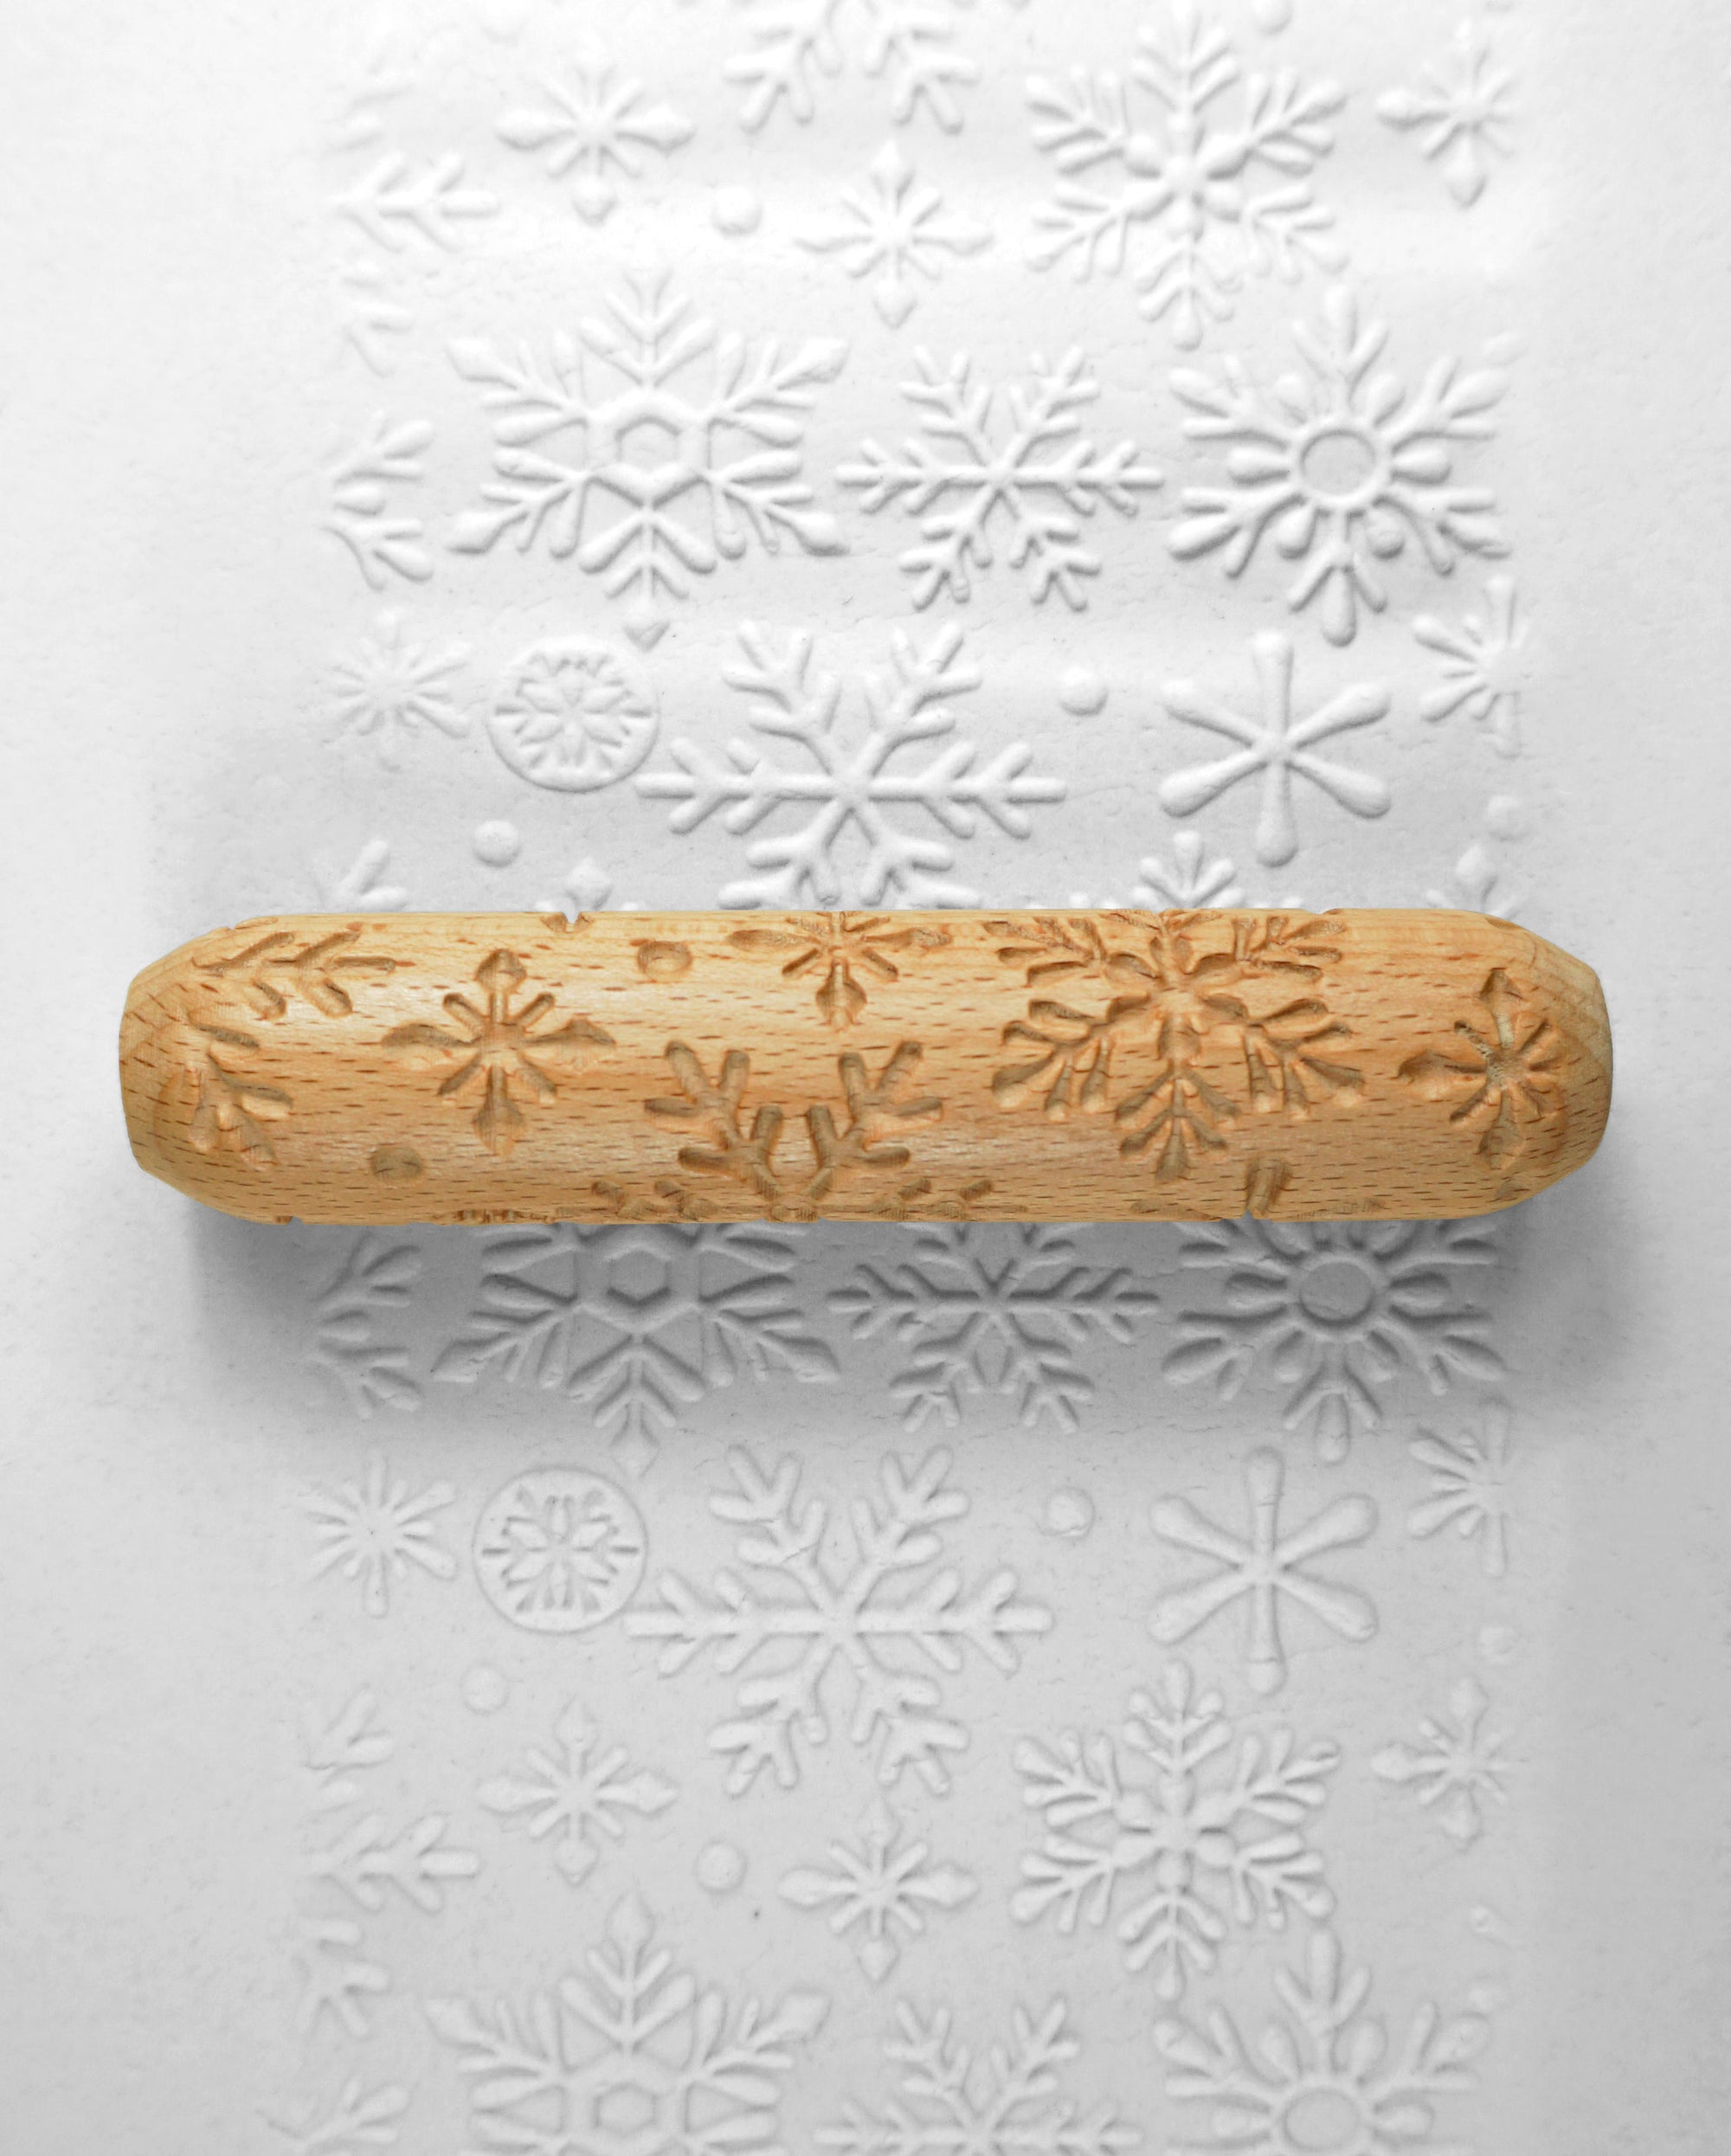 Wooden Texture Mud Stars/Snowflakes Pressed Roller Pattern Roller